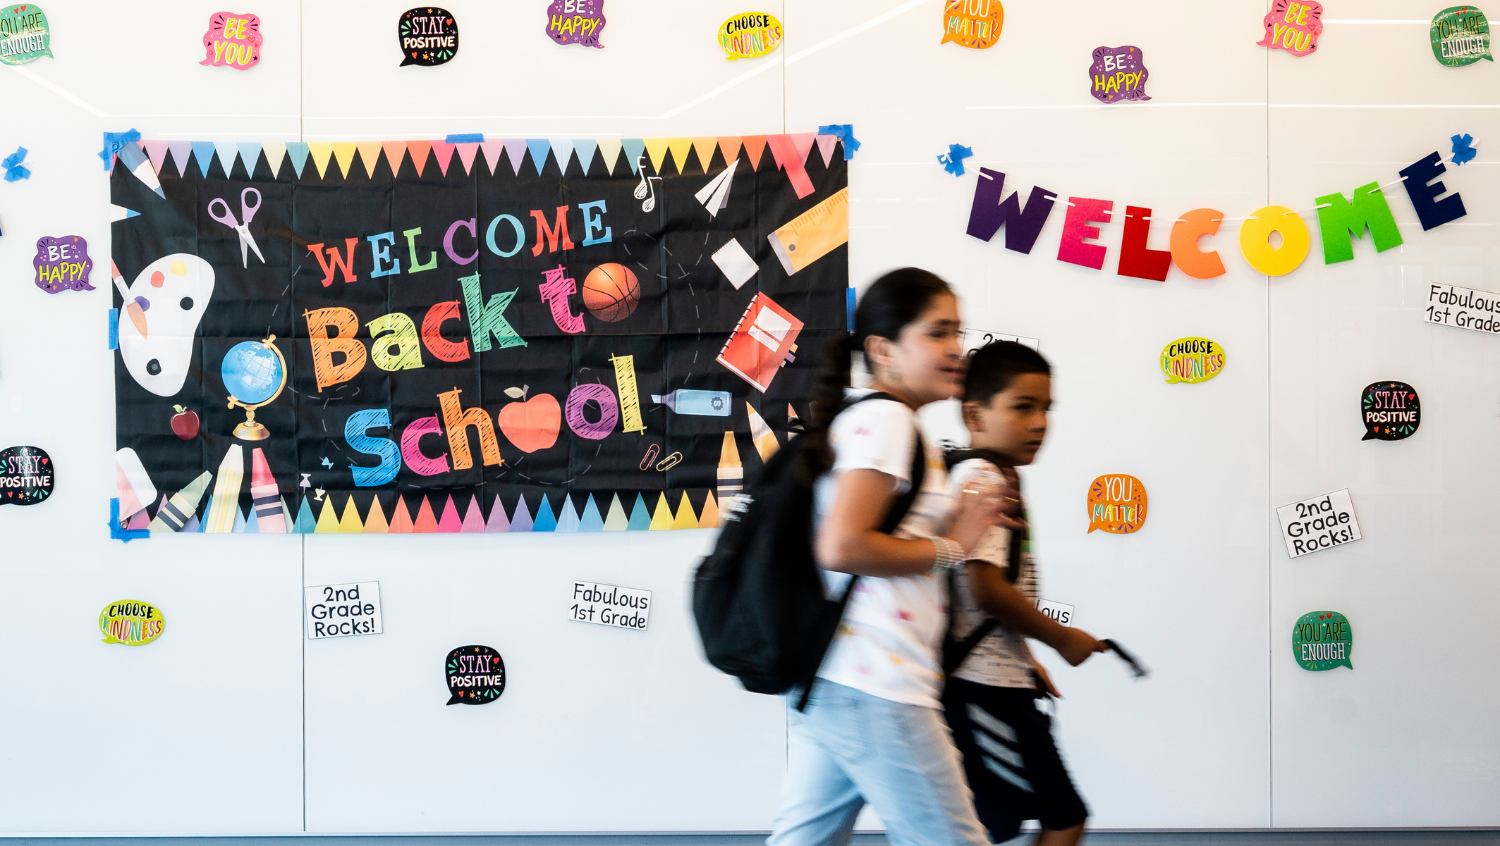 two students wearing backpacks walk down a school hallway decorated for the start of school. There are signs that say welcome back to school and posters with encouraging words on them.